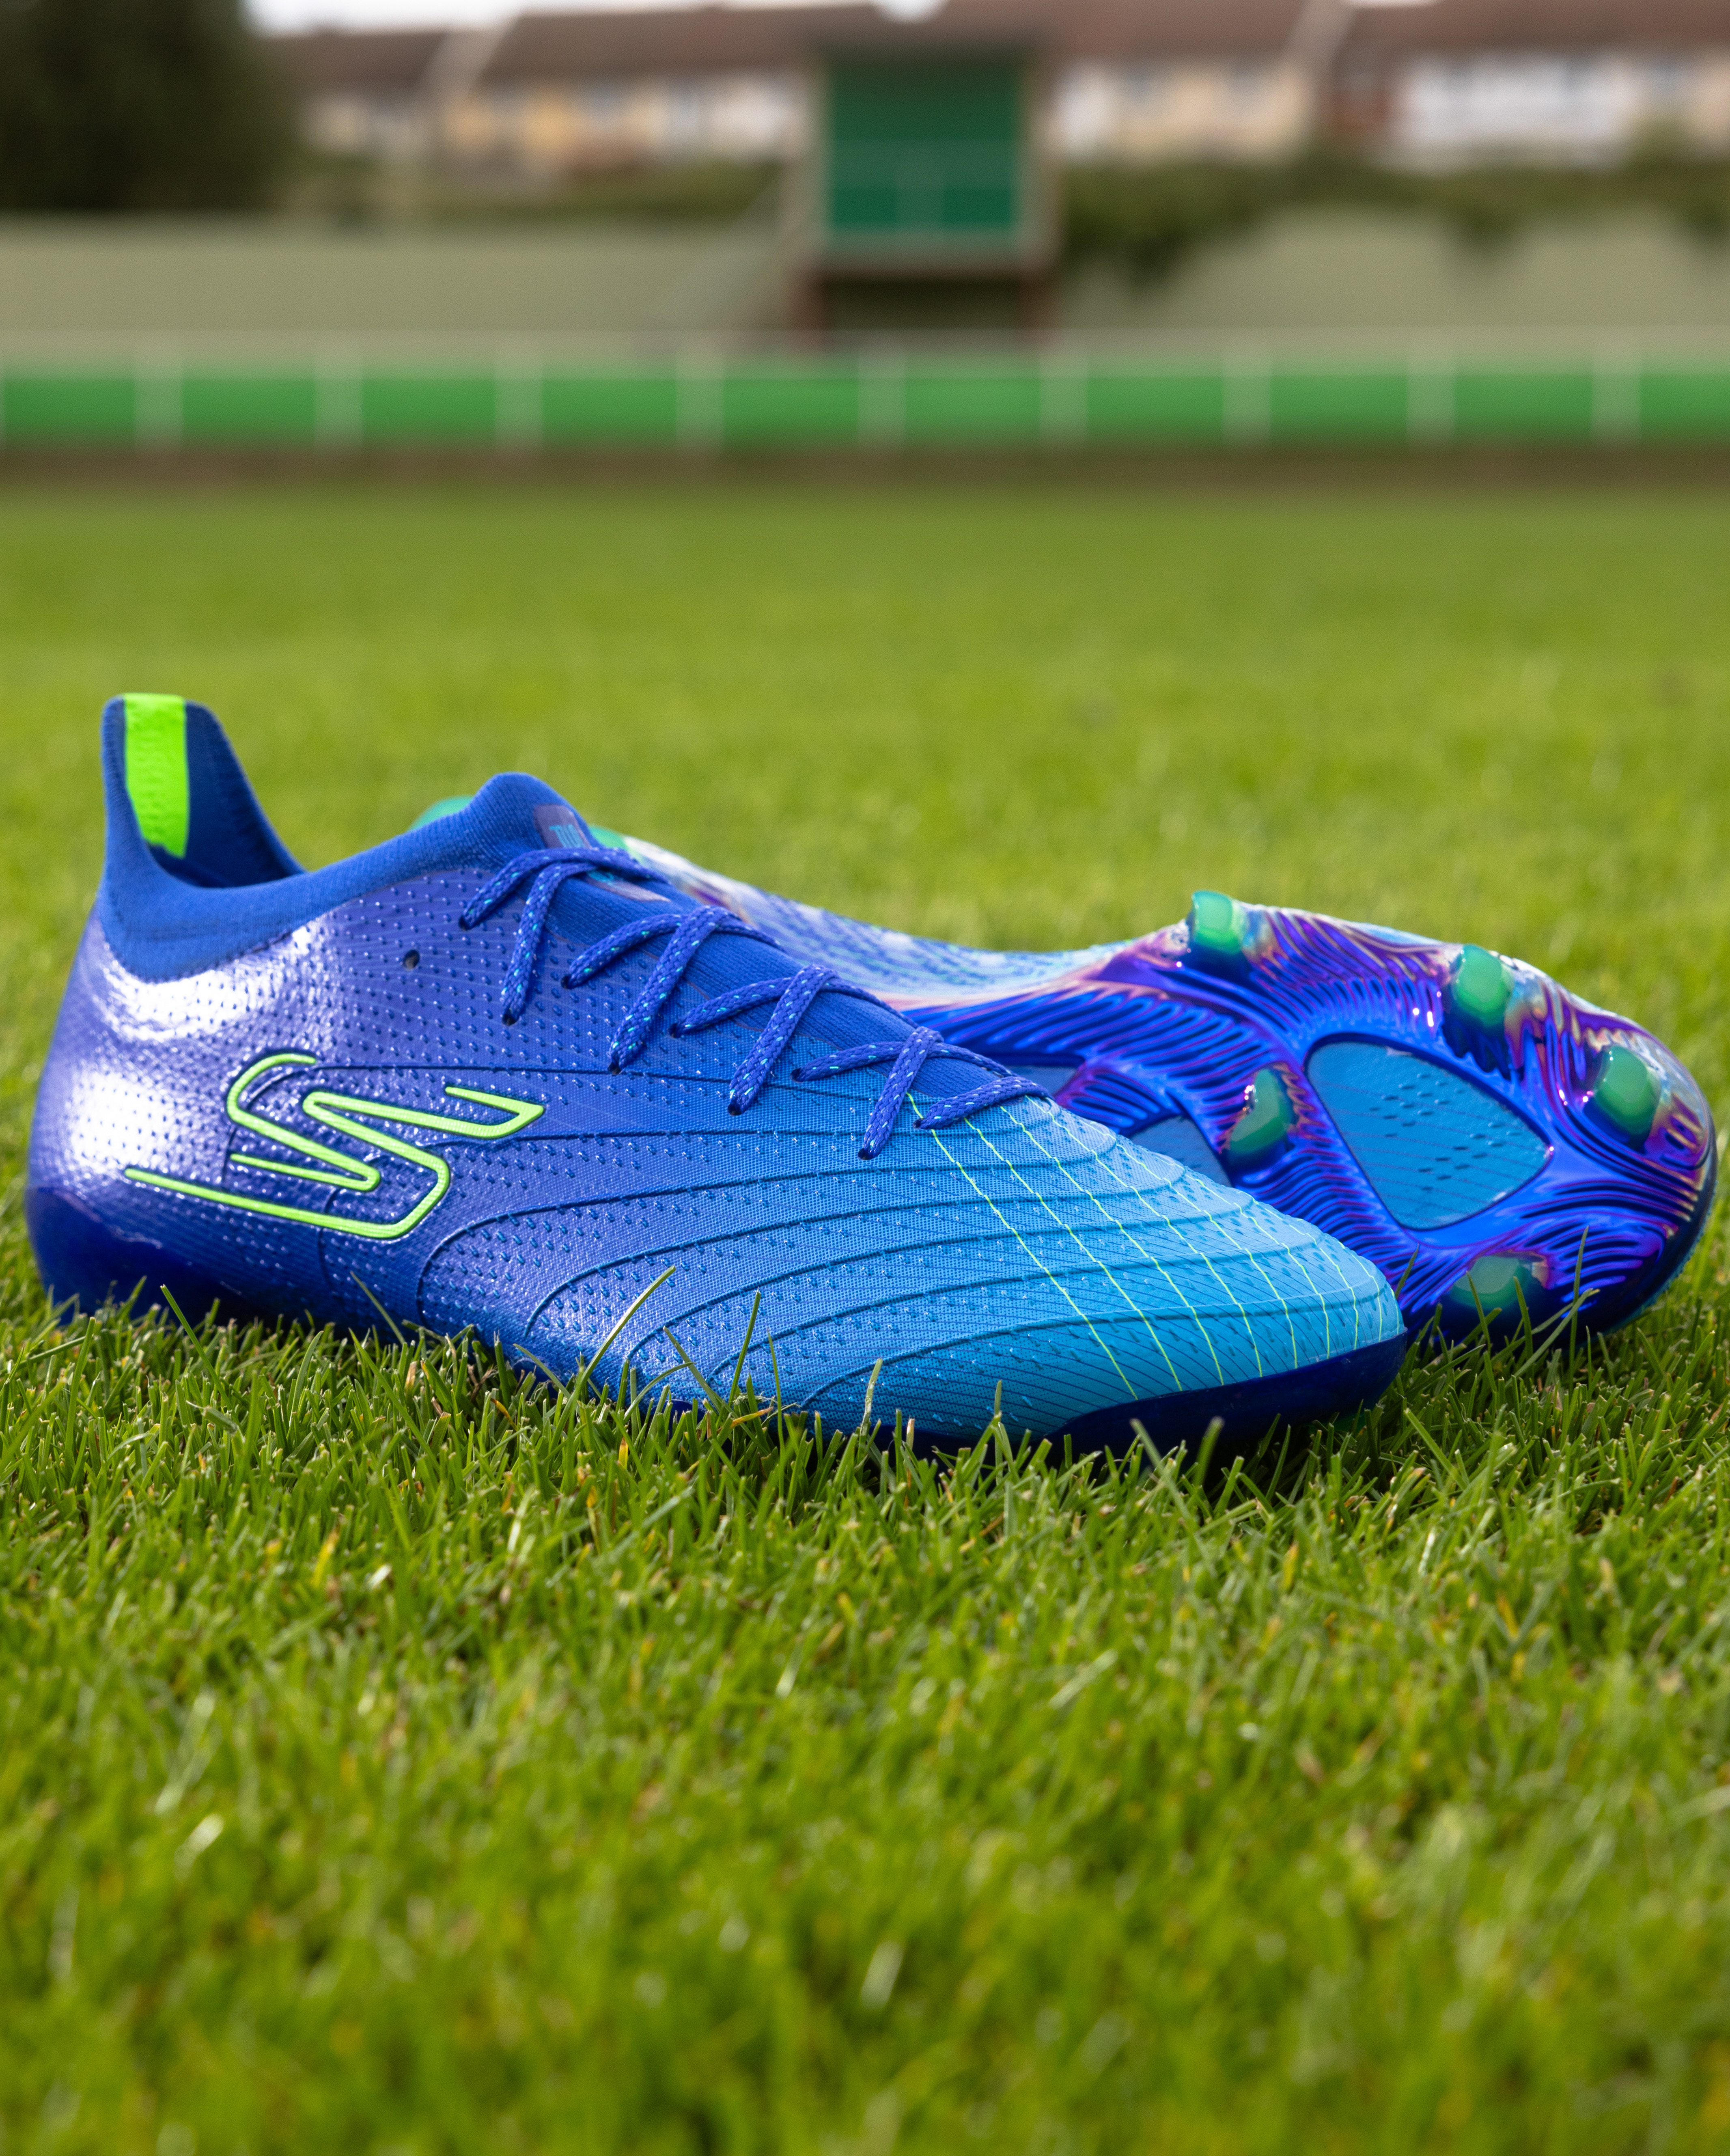 Skechers Performance Football Boots Now Available